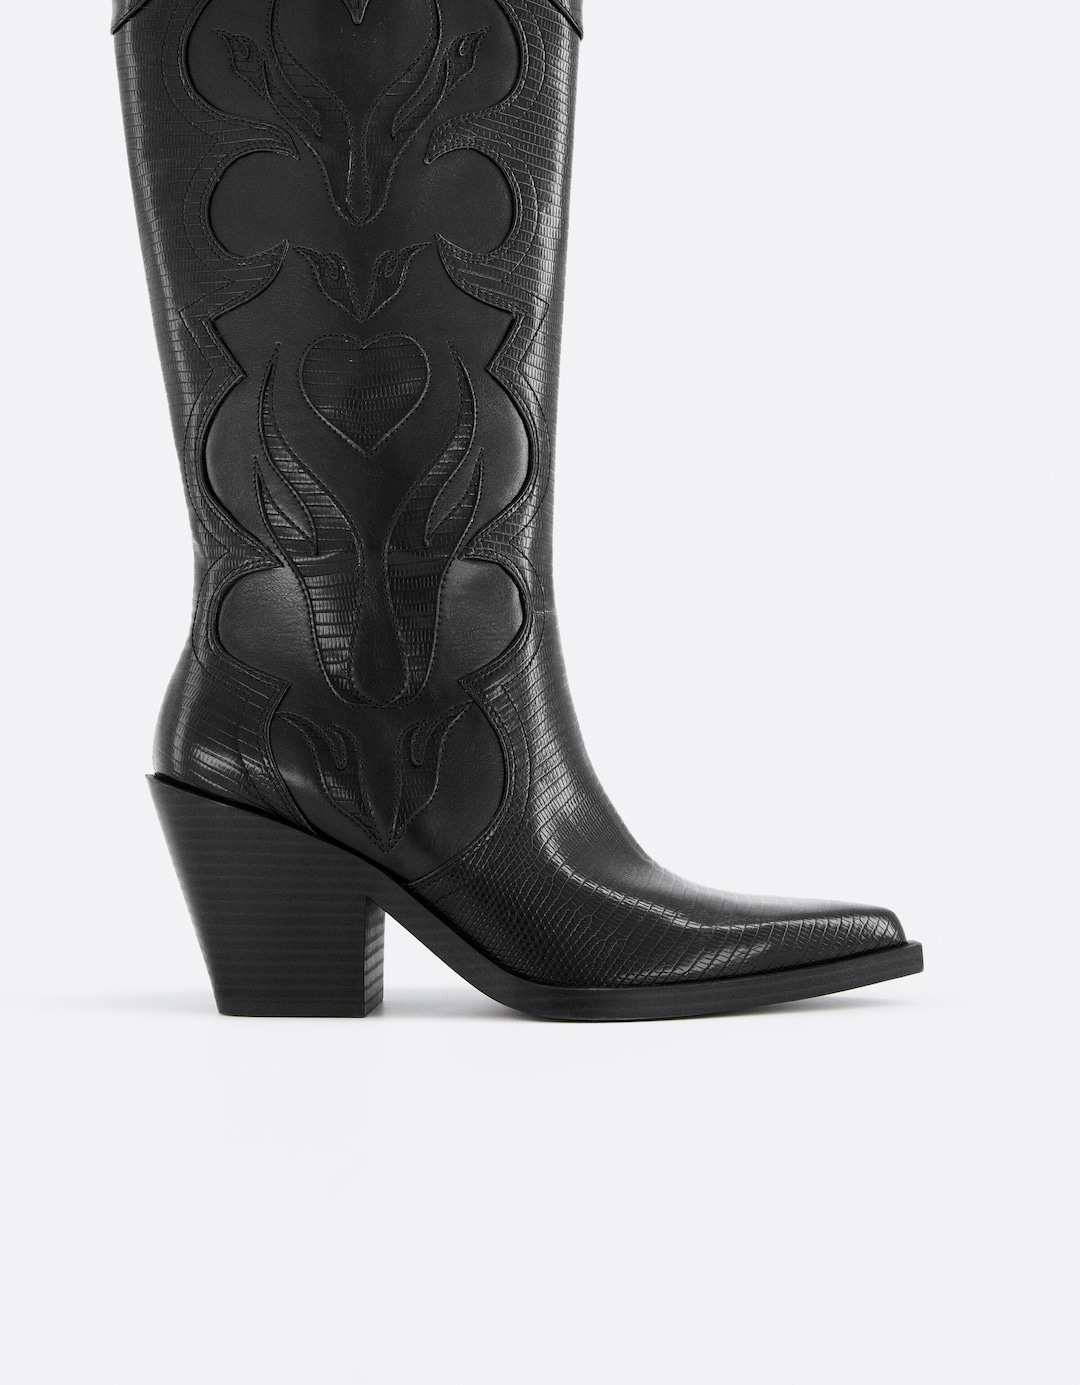 Contrast embroidered high-heel cowboy boots